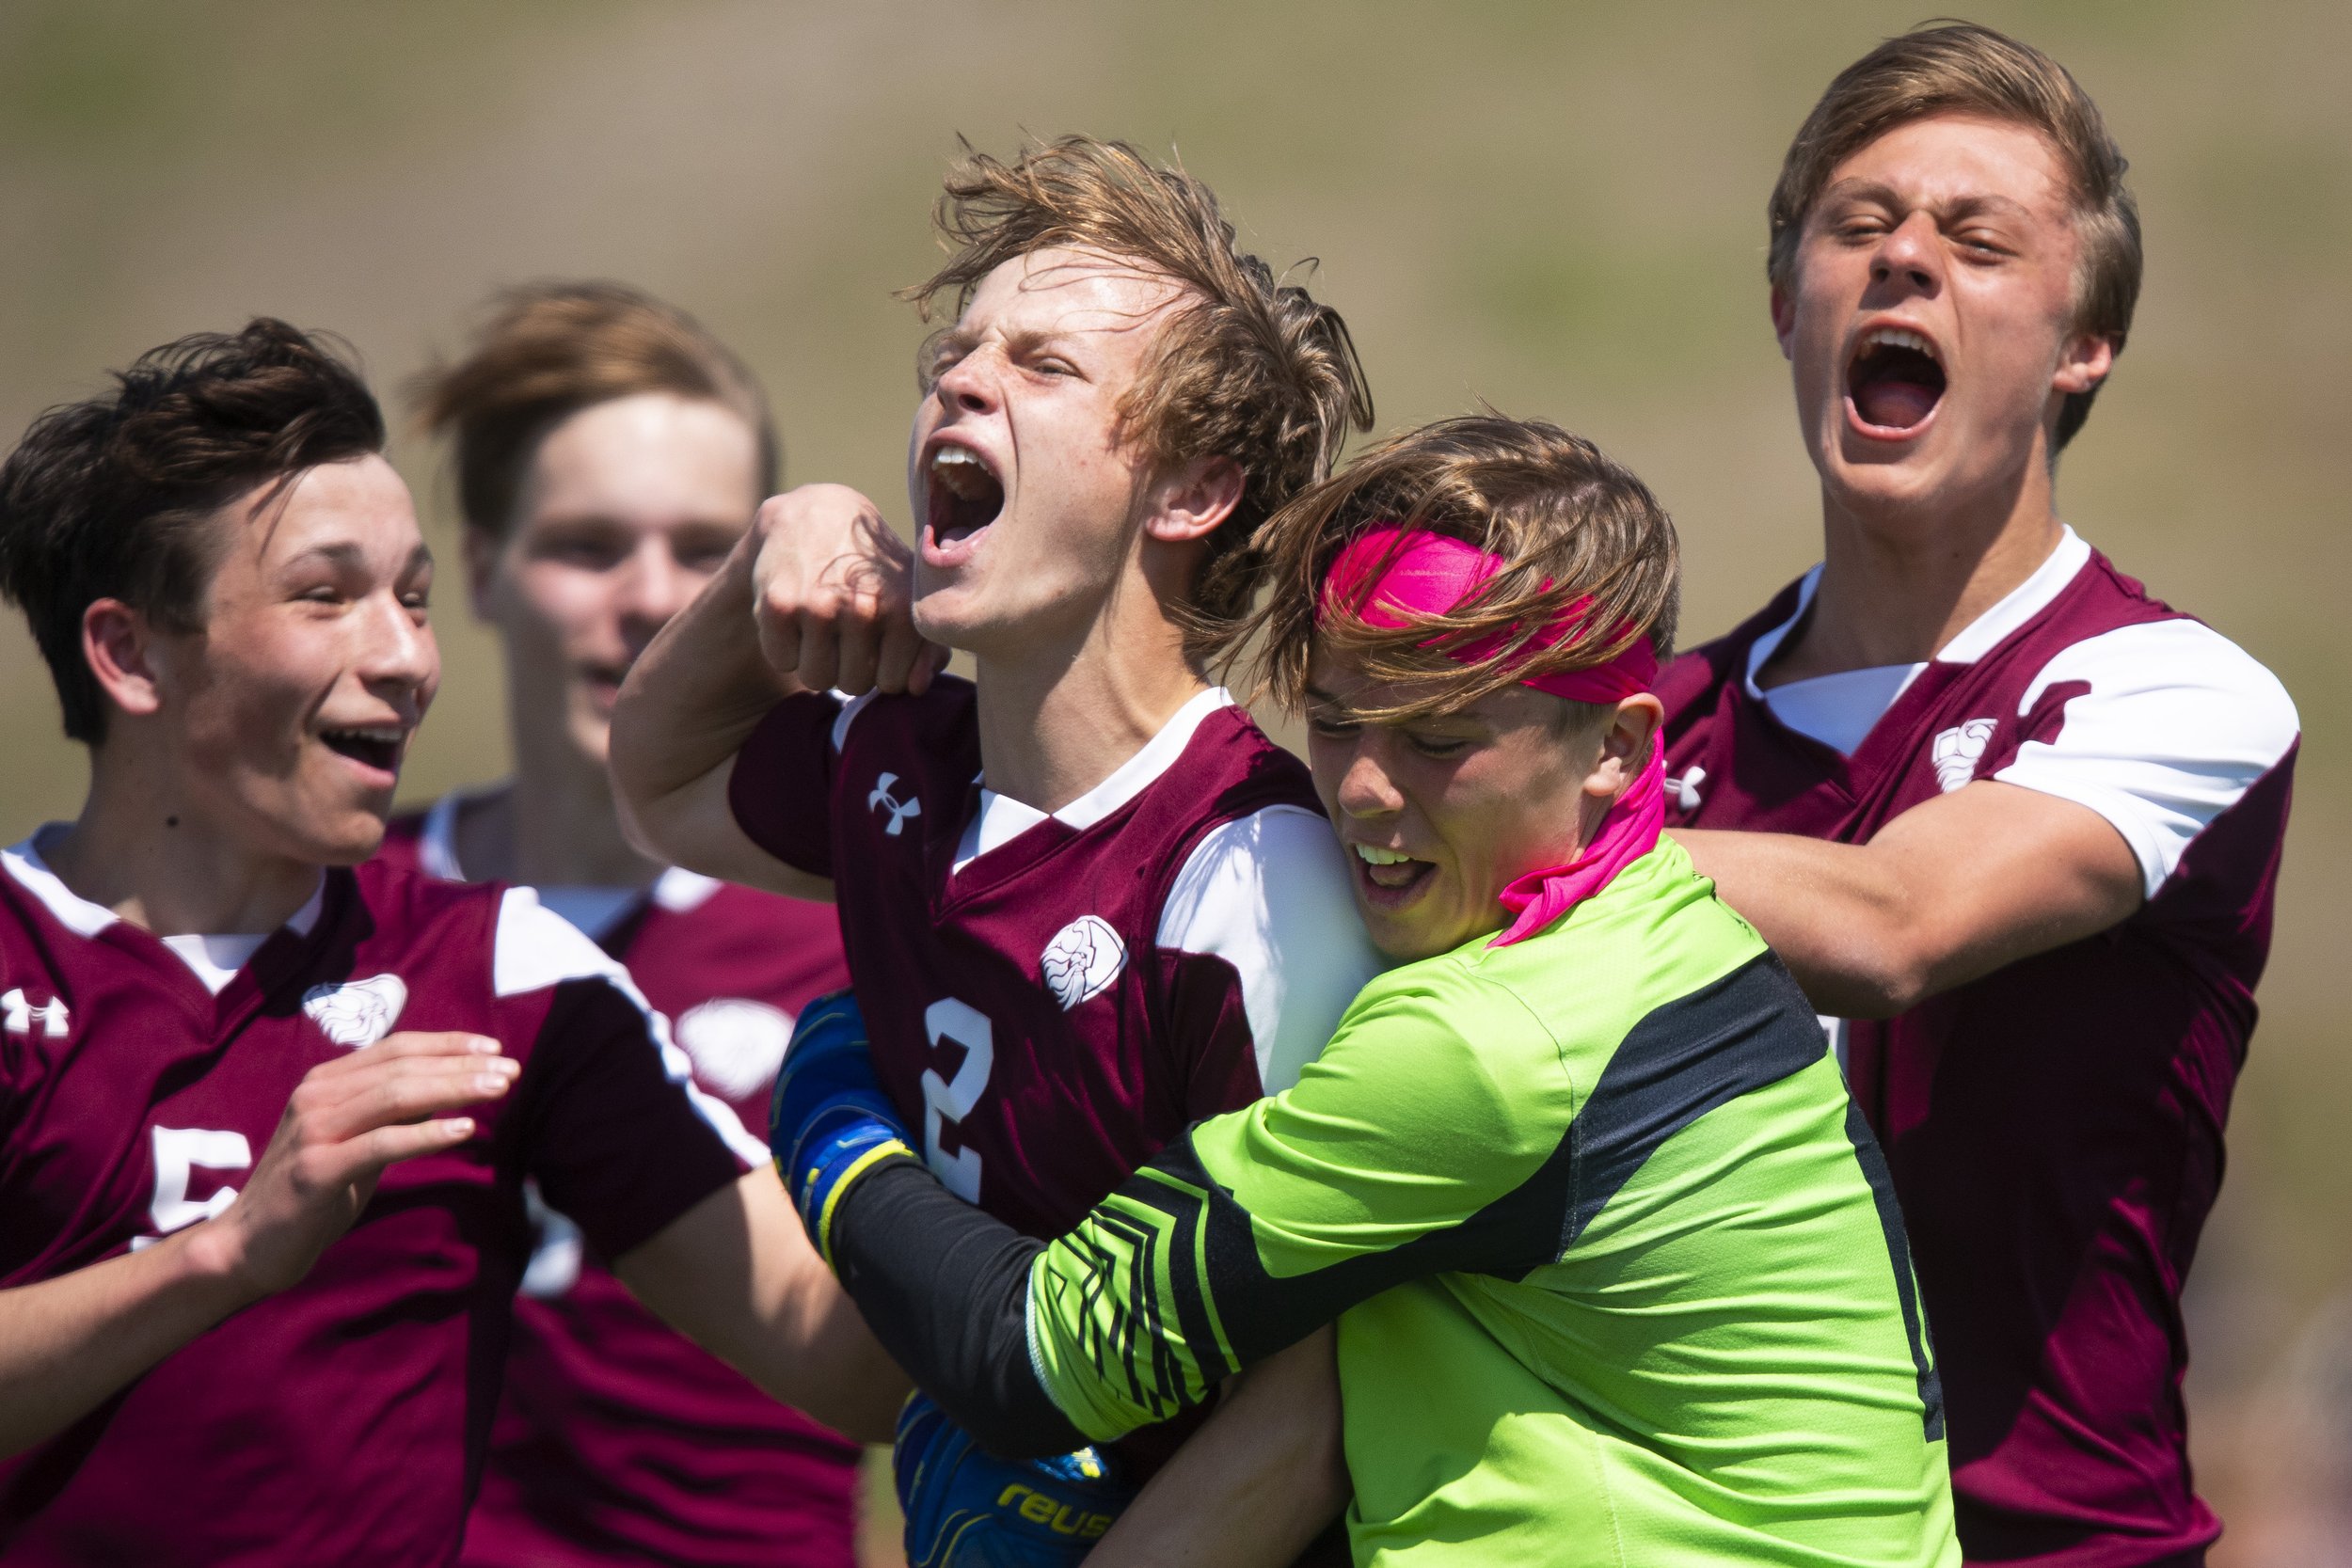  Waverly's Tyler Brewer (center) celebrates with his team after scoring in the final minutes of the second half, evening the score 1-1 against Crete during the District B-5 boys championship at Waverly High School on May 7, 2022, in Waverly, Nebraska